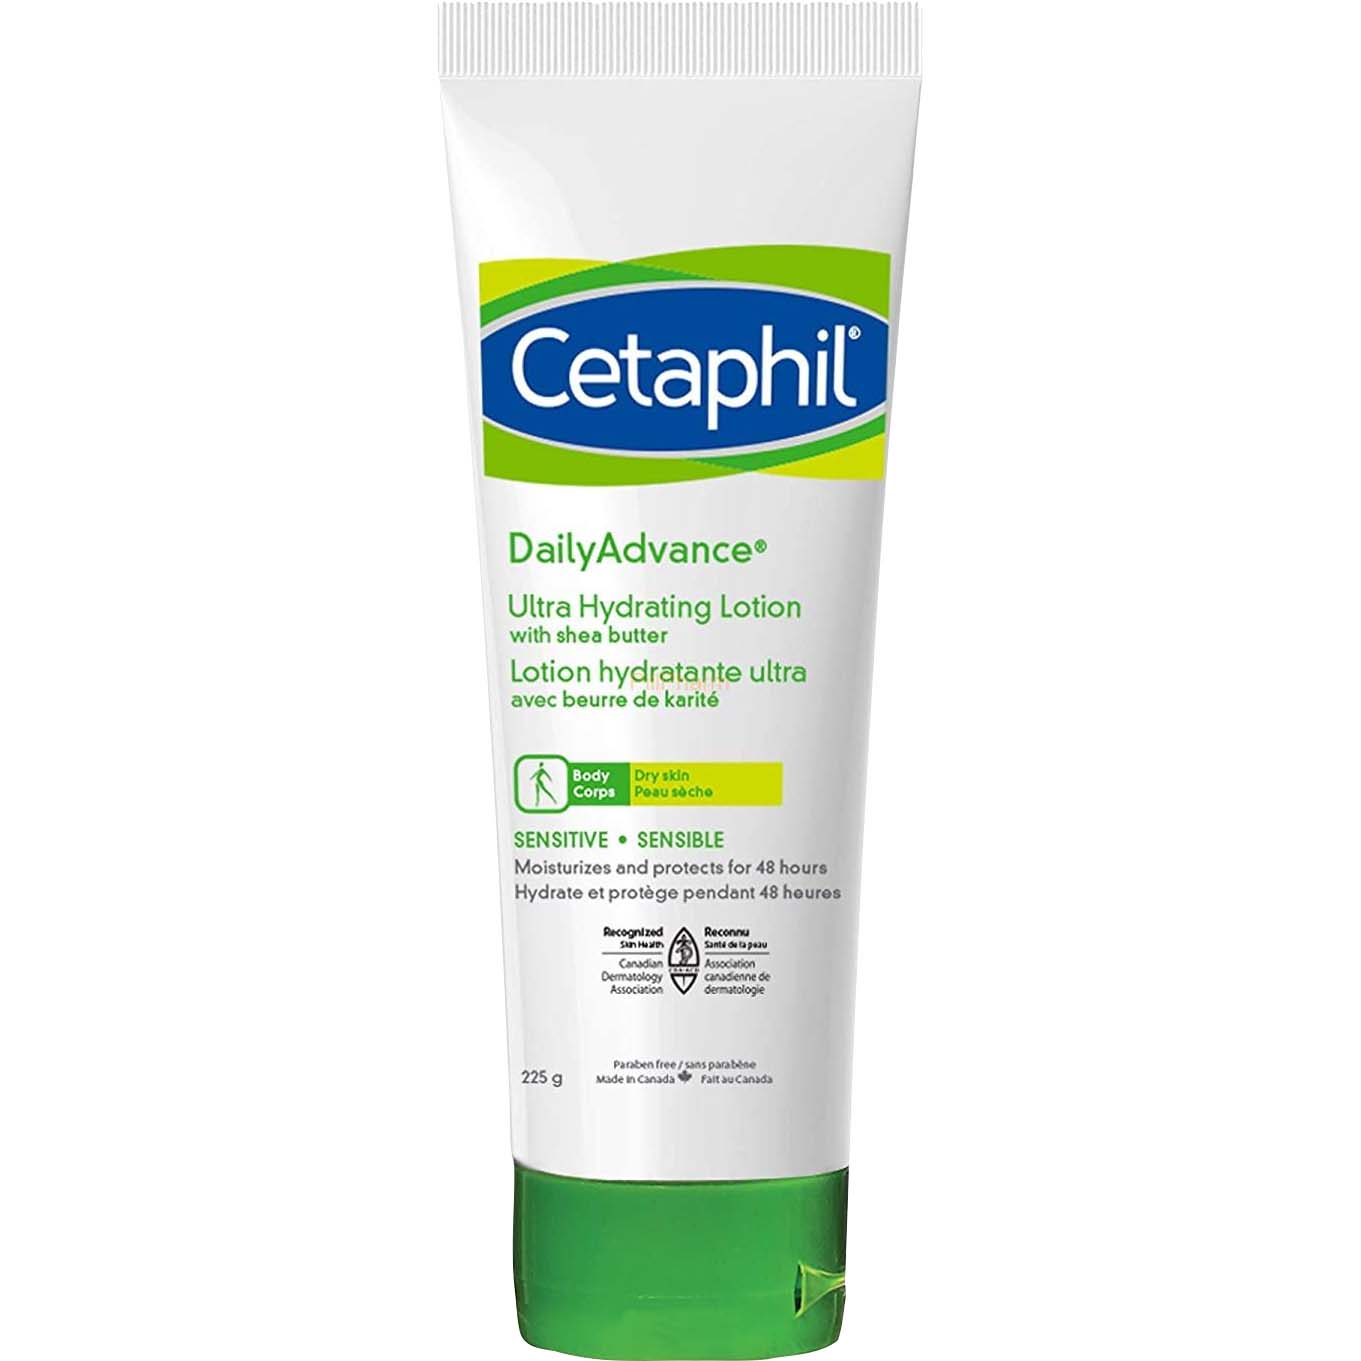 Cetaphil Daily Advance Ultra Hydrating Lotion, 225 GM